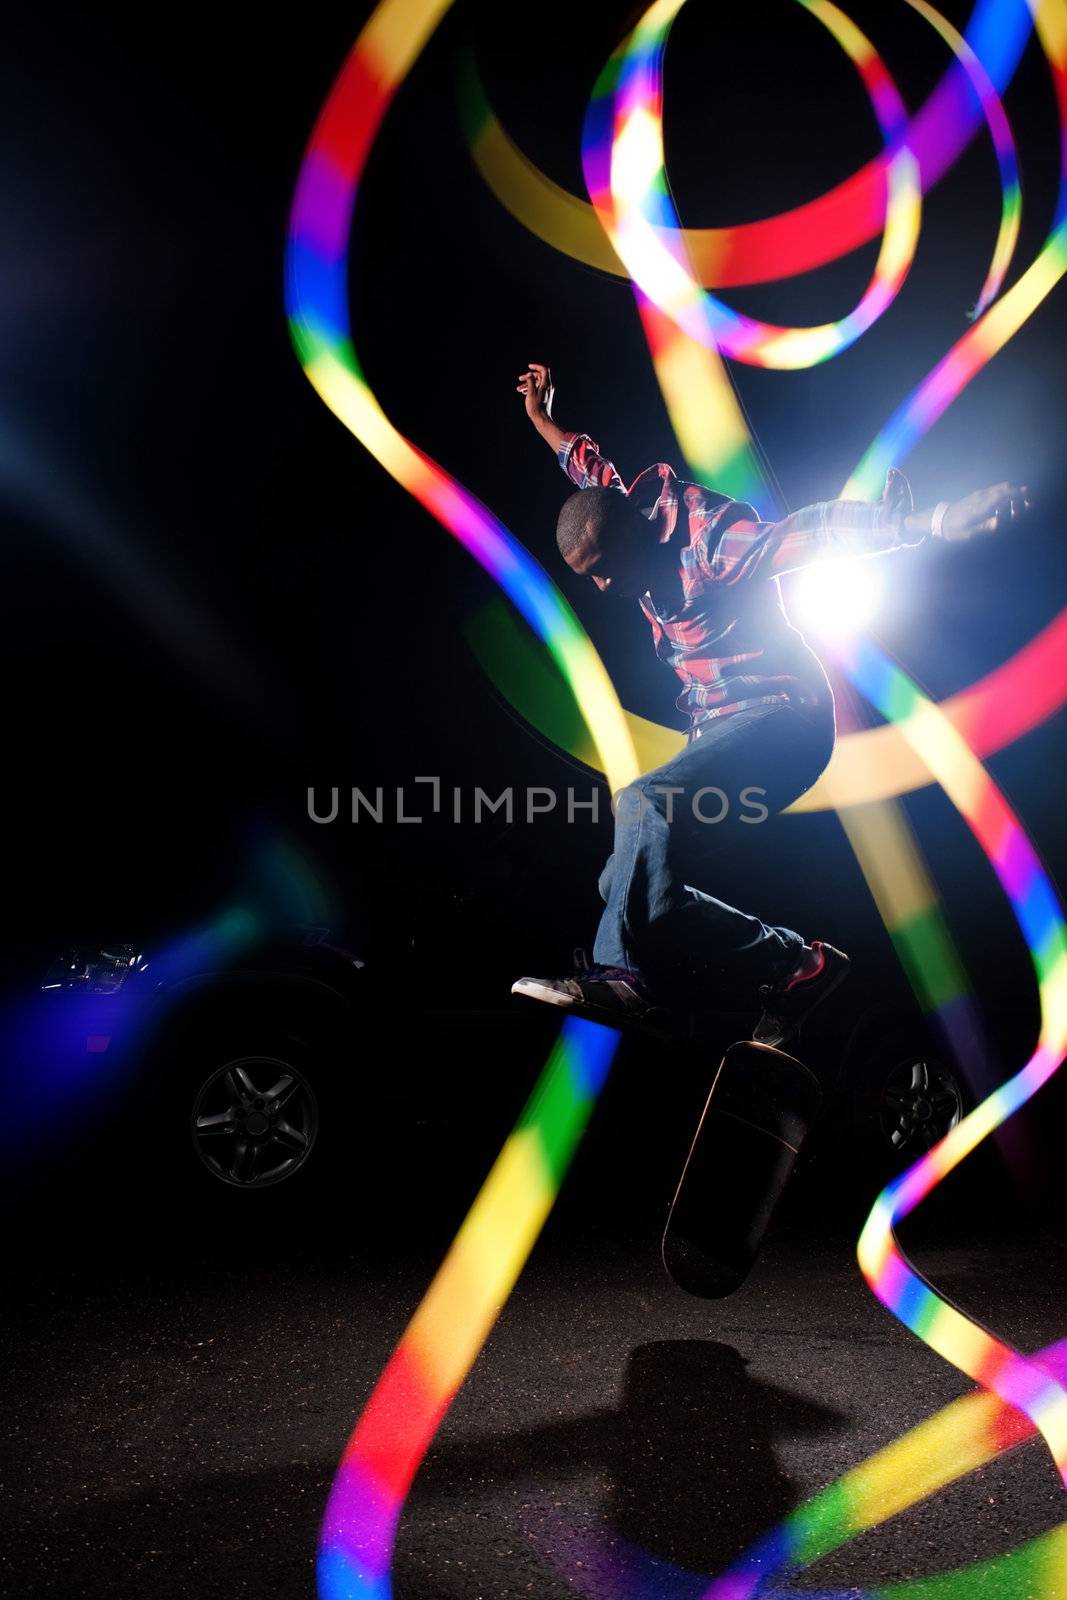 Skateboarder with Abstract Light Trails by graficallyminded